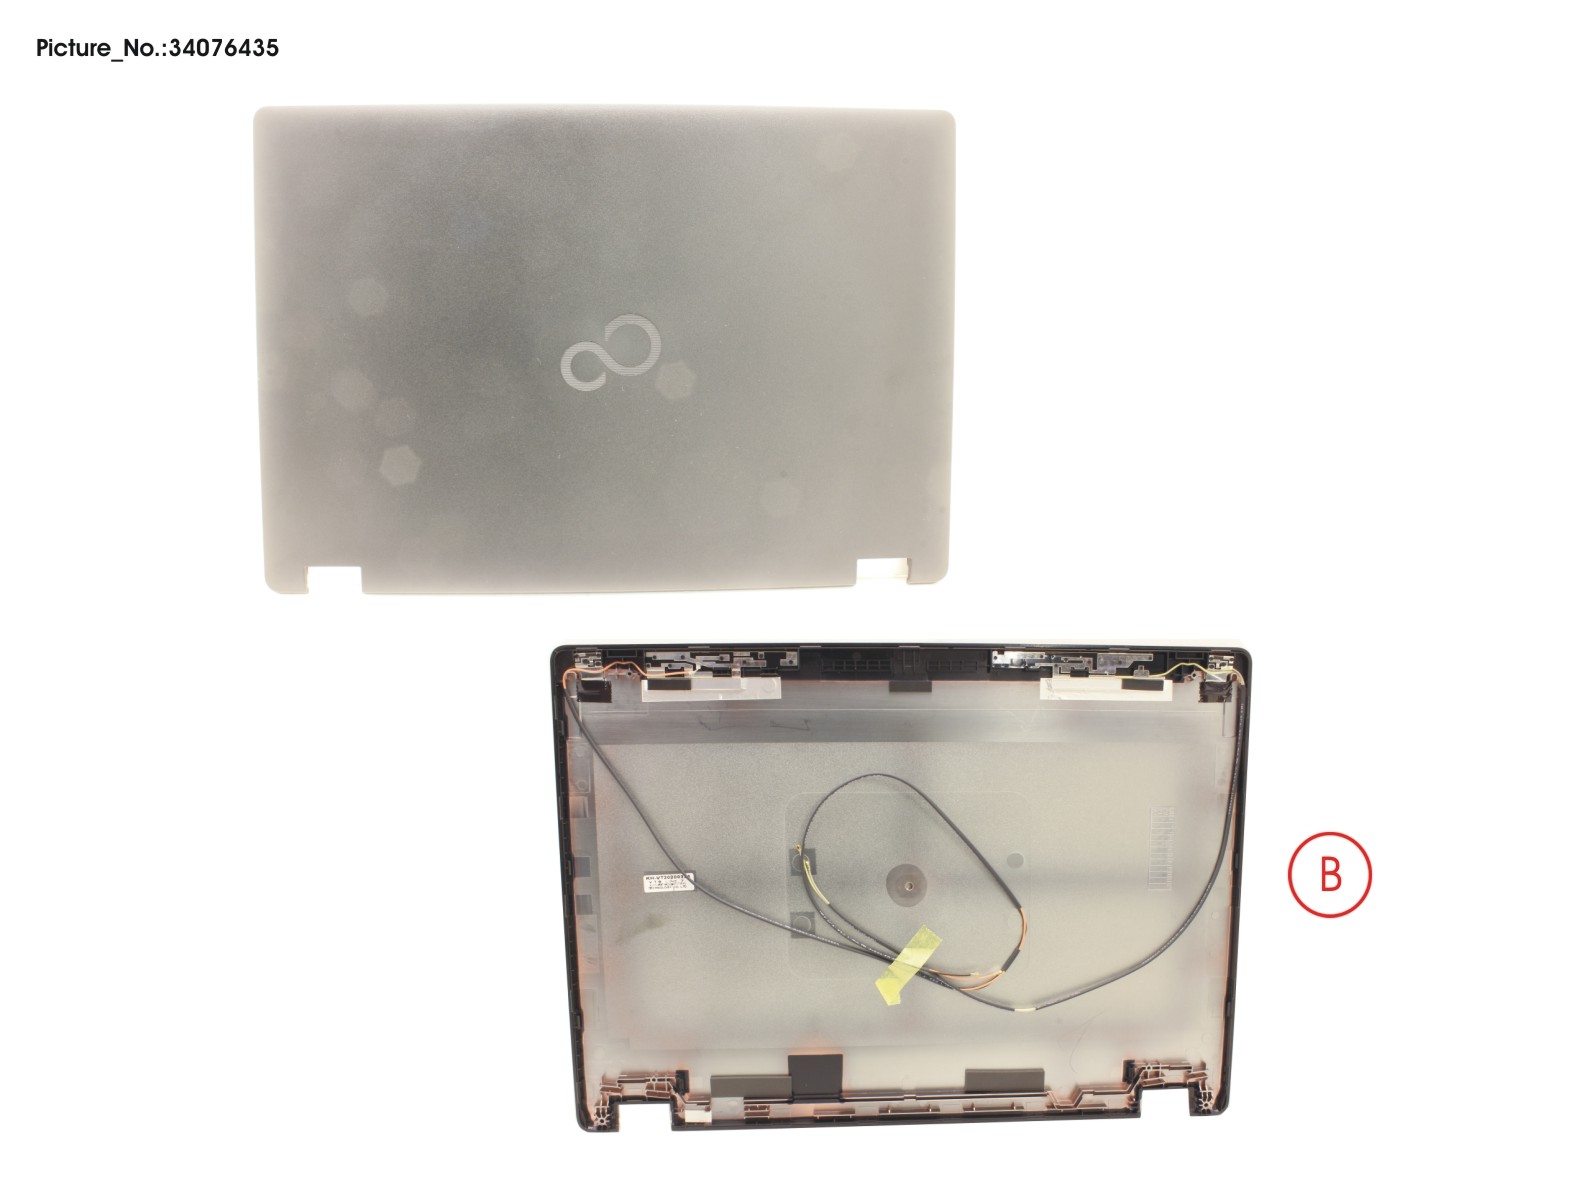 LCD BACK COVER ASSY (FHD)